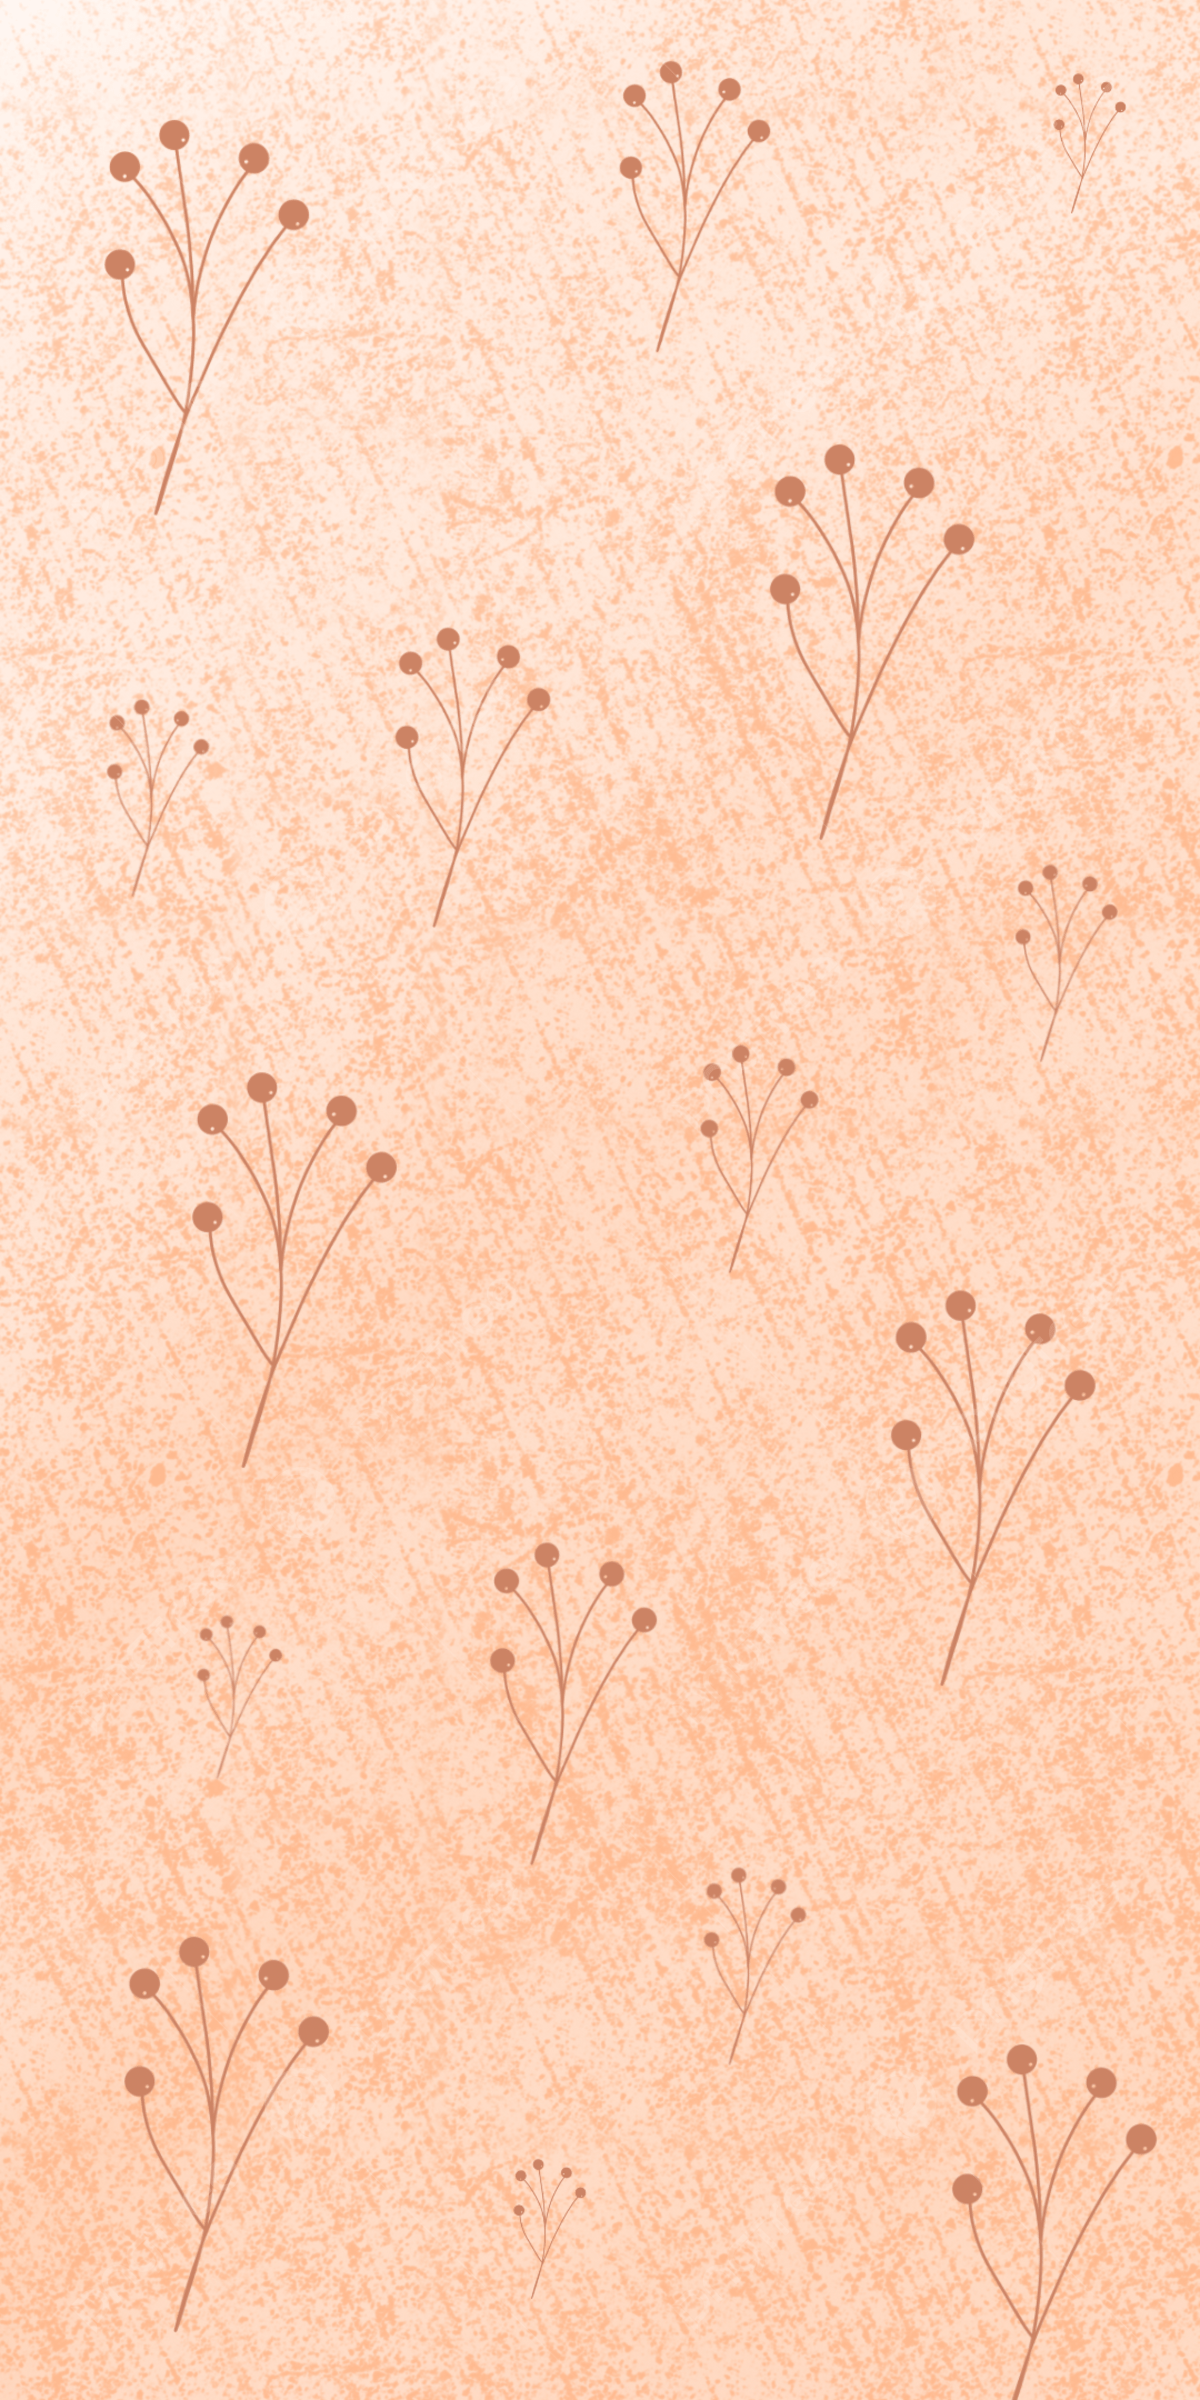 A pattern of small flowers on a pink background - Kawaii